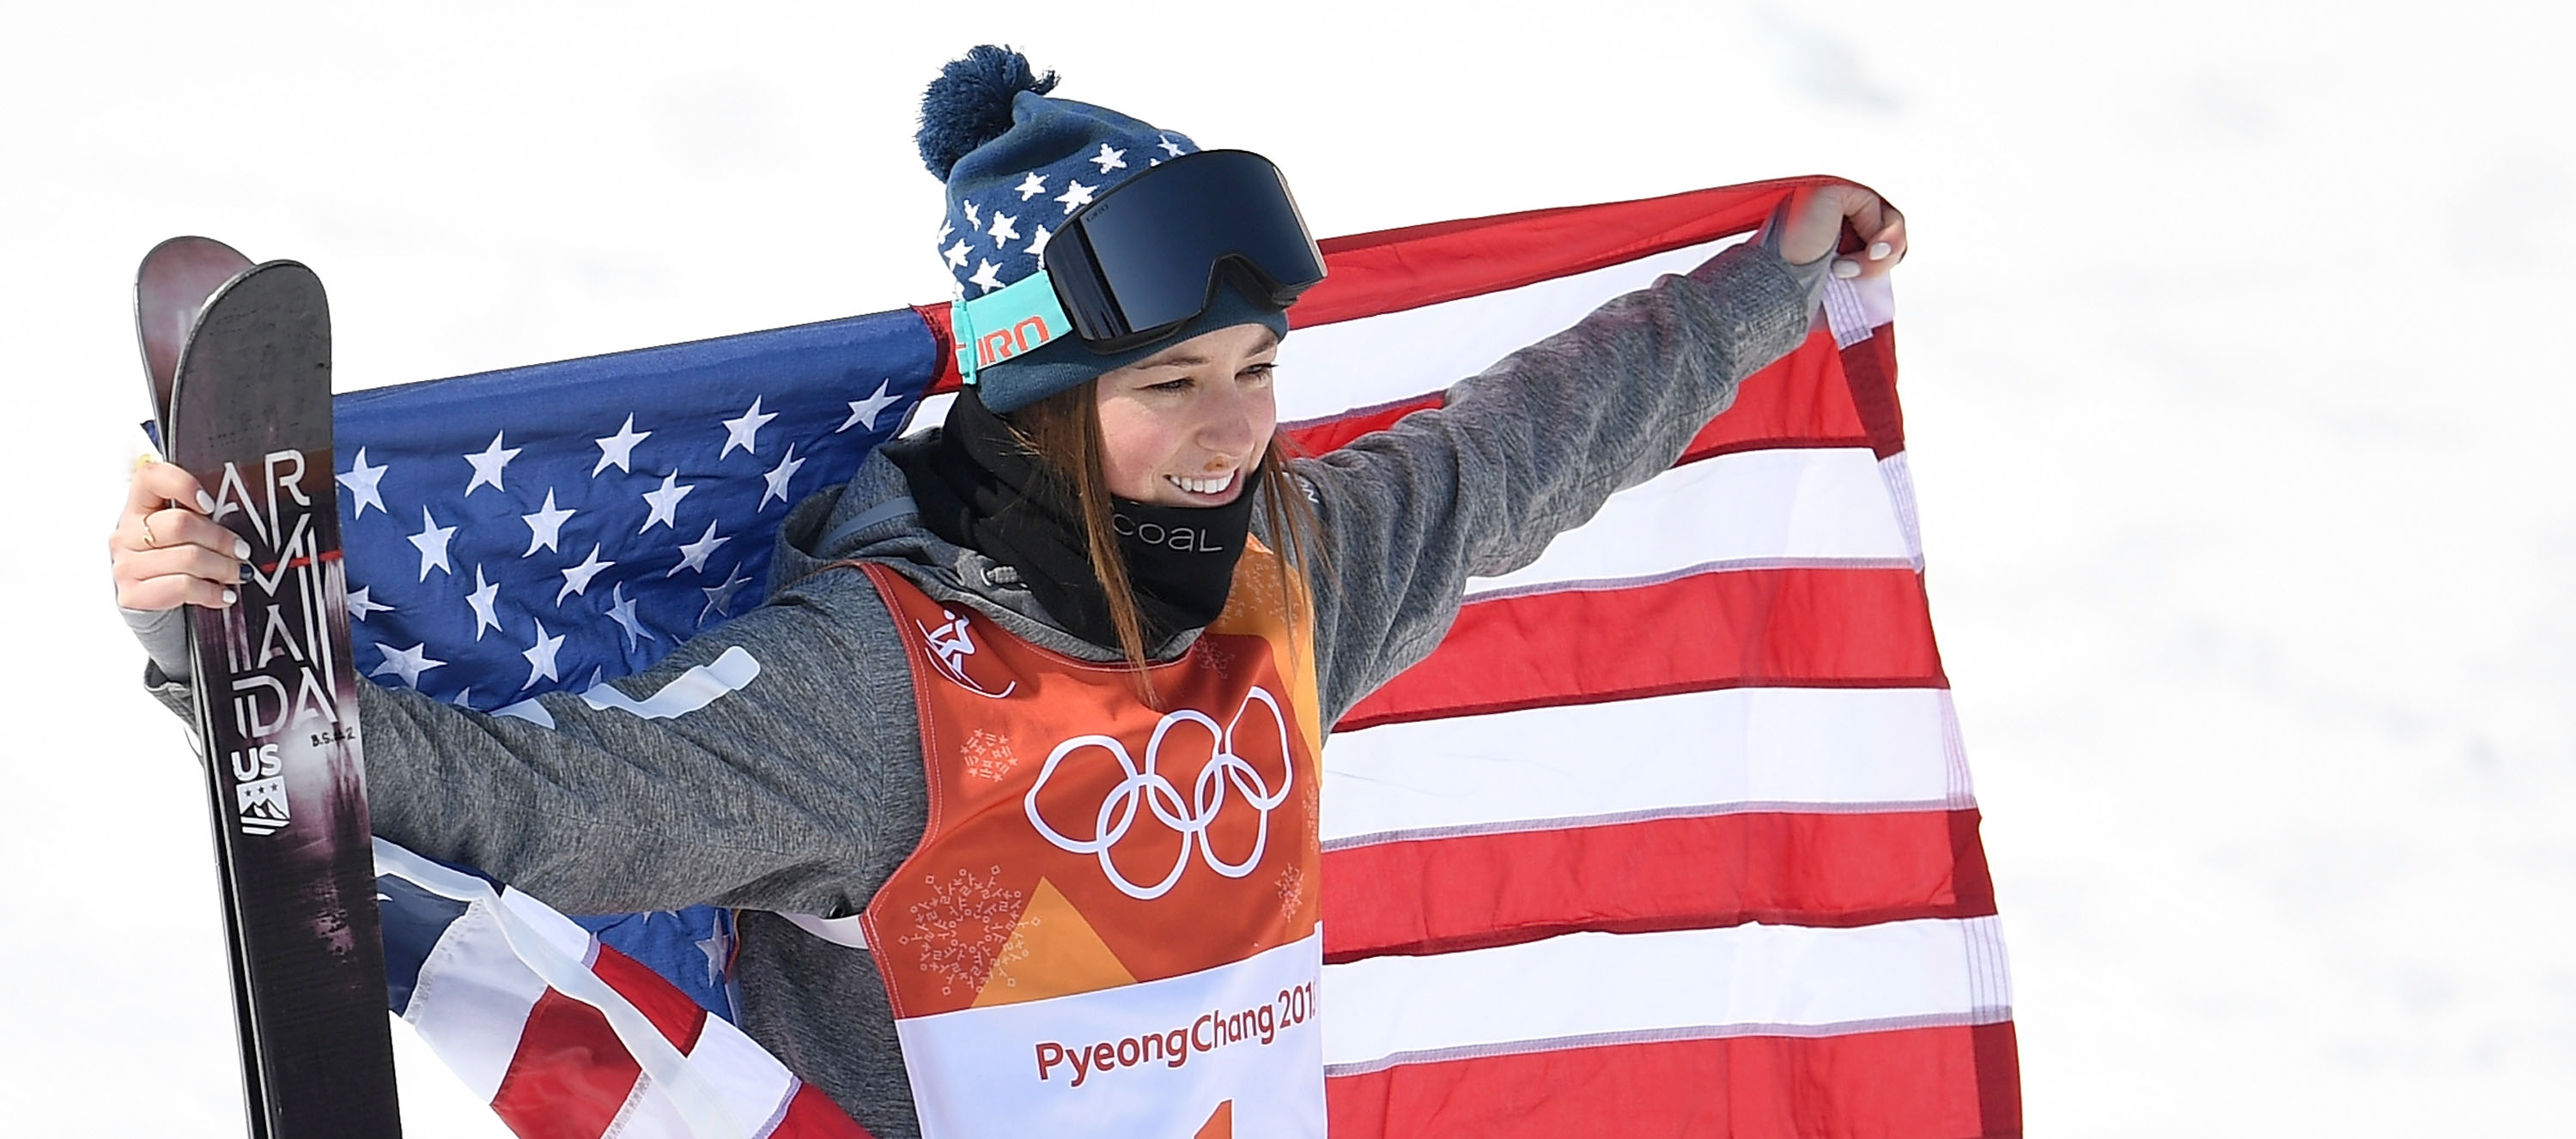 Brita Sigourney celebrates after winning the halfpipe bronze medal at the 2018 Olympic Winter Games. (Getty Images - David Ramos)